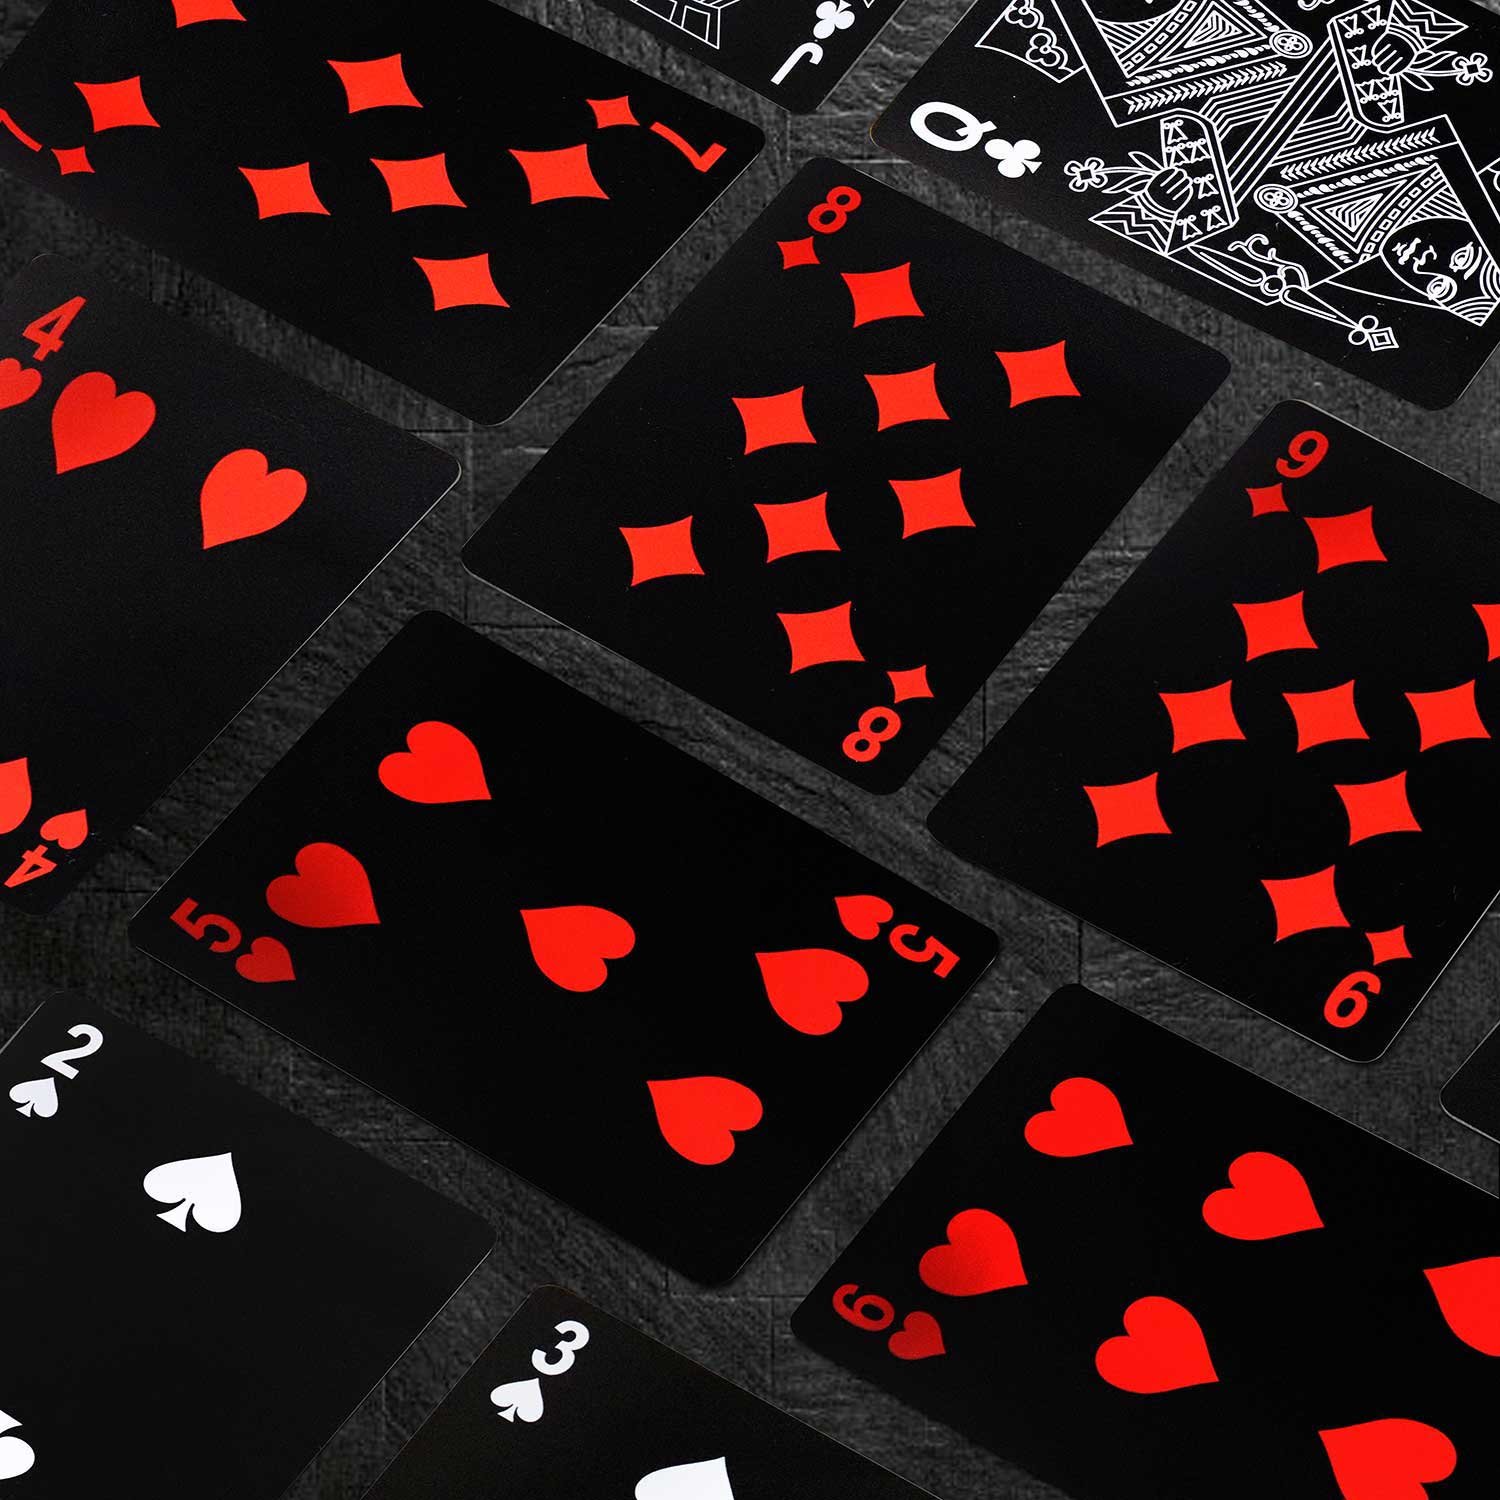 Black Playing Cards - Animal Series (With Partial Special Gloss Varnish)